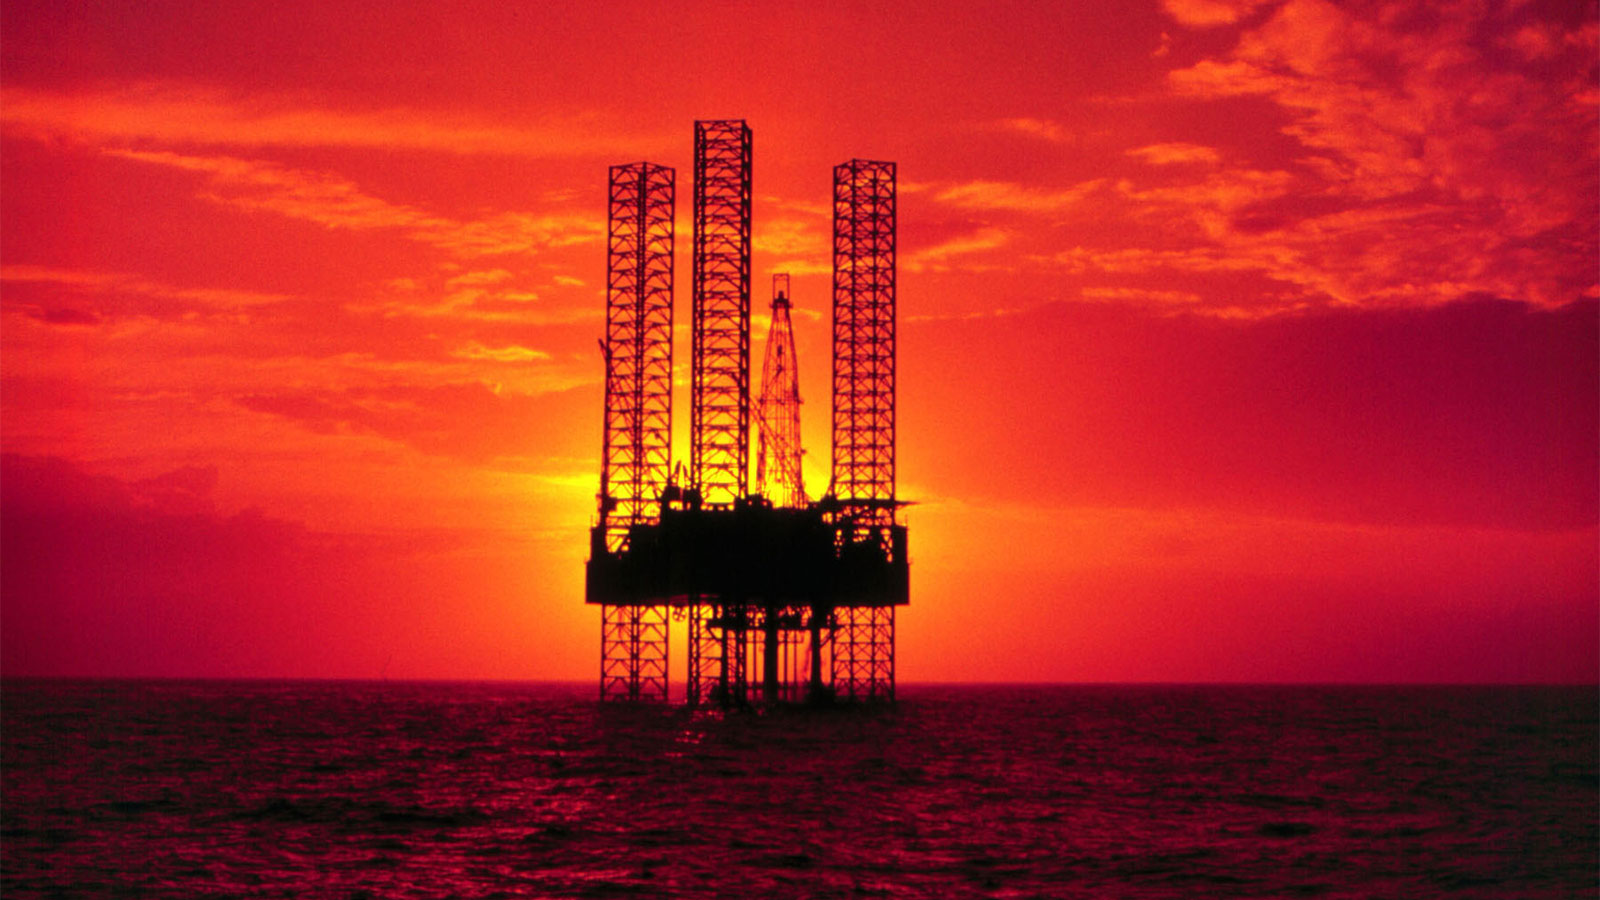 An offshore oil rig against a brilliant sunset